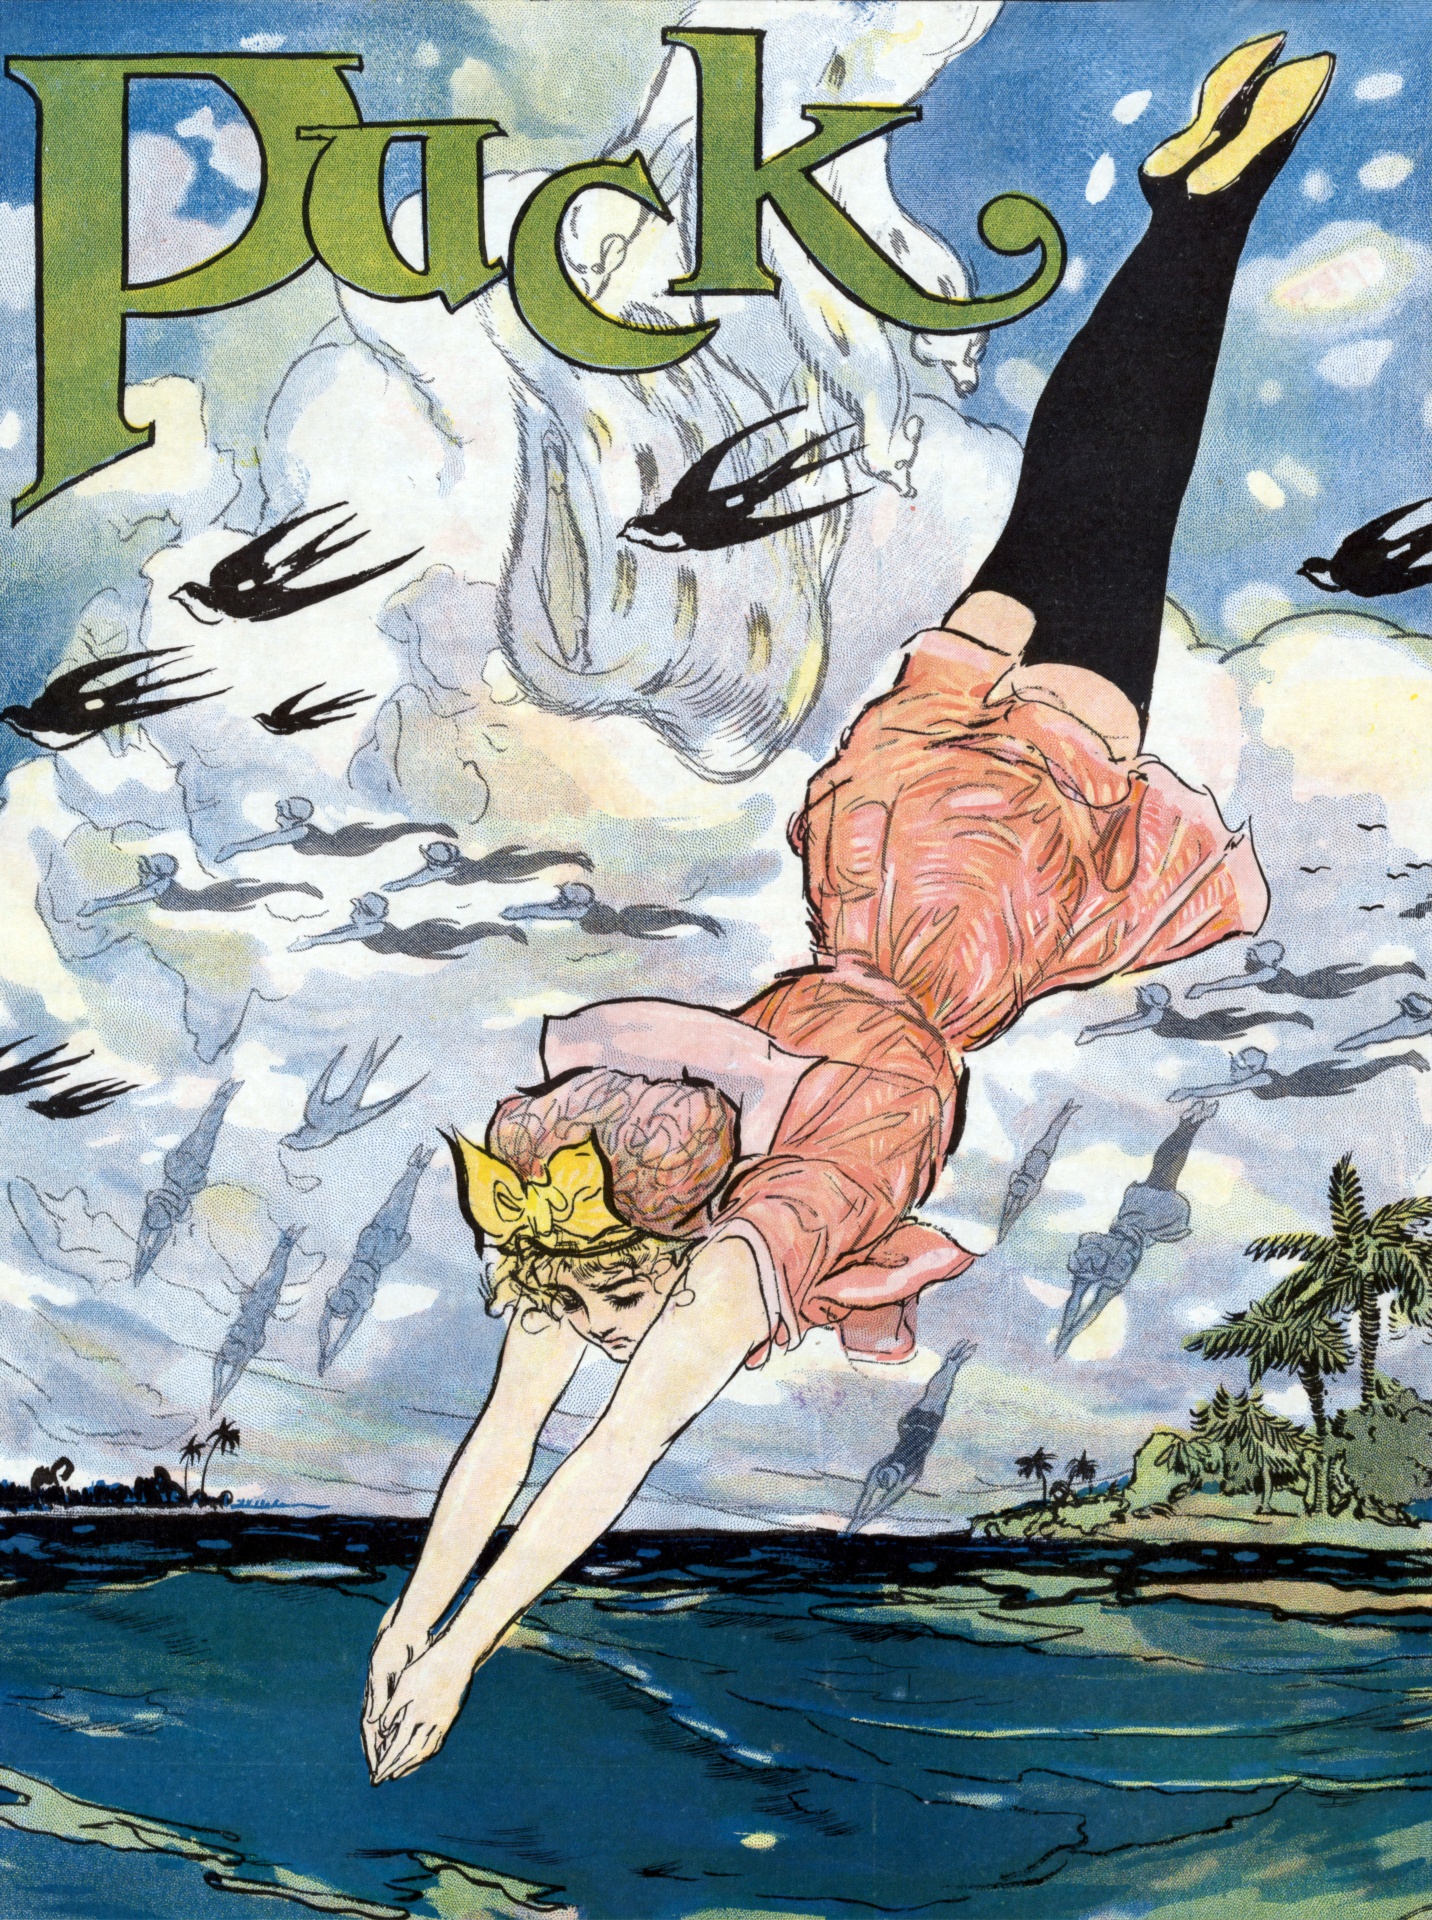 Puck Cover Illustrated Magazine Woman Jumping Into Water Swimwear Sea Vintage Art Old Public Domain